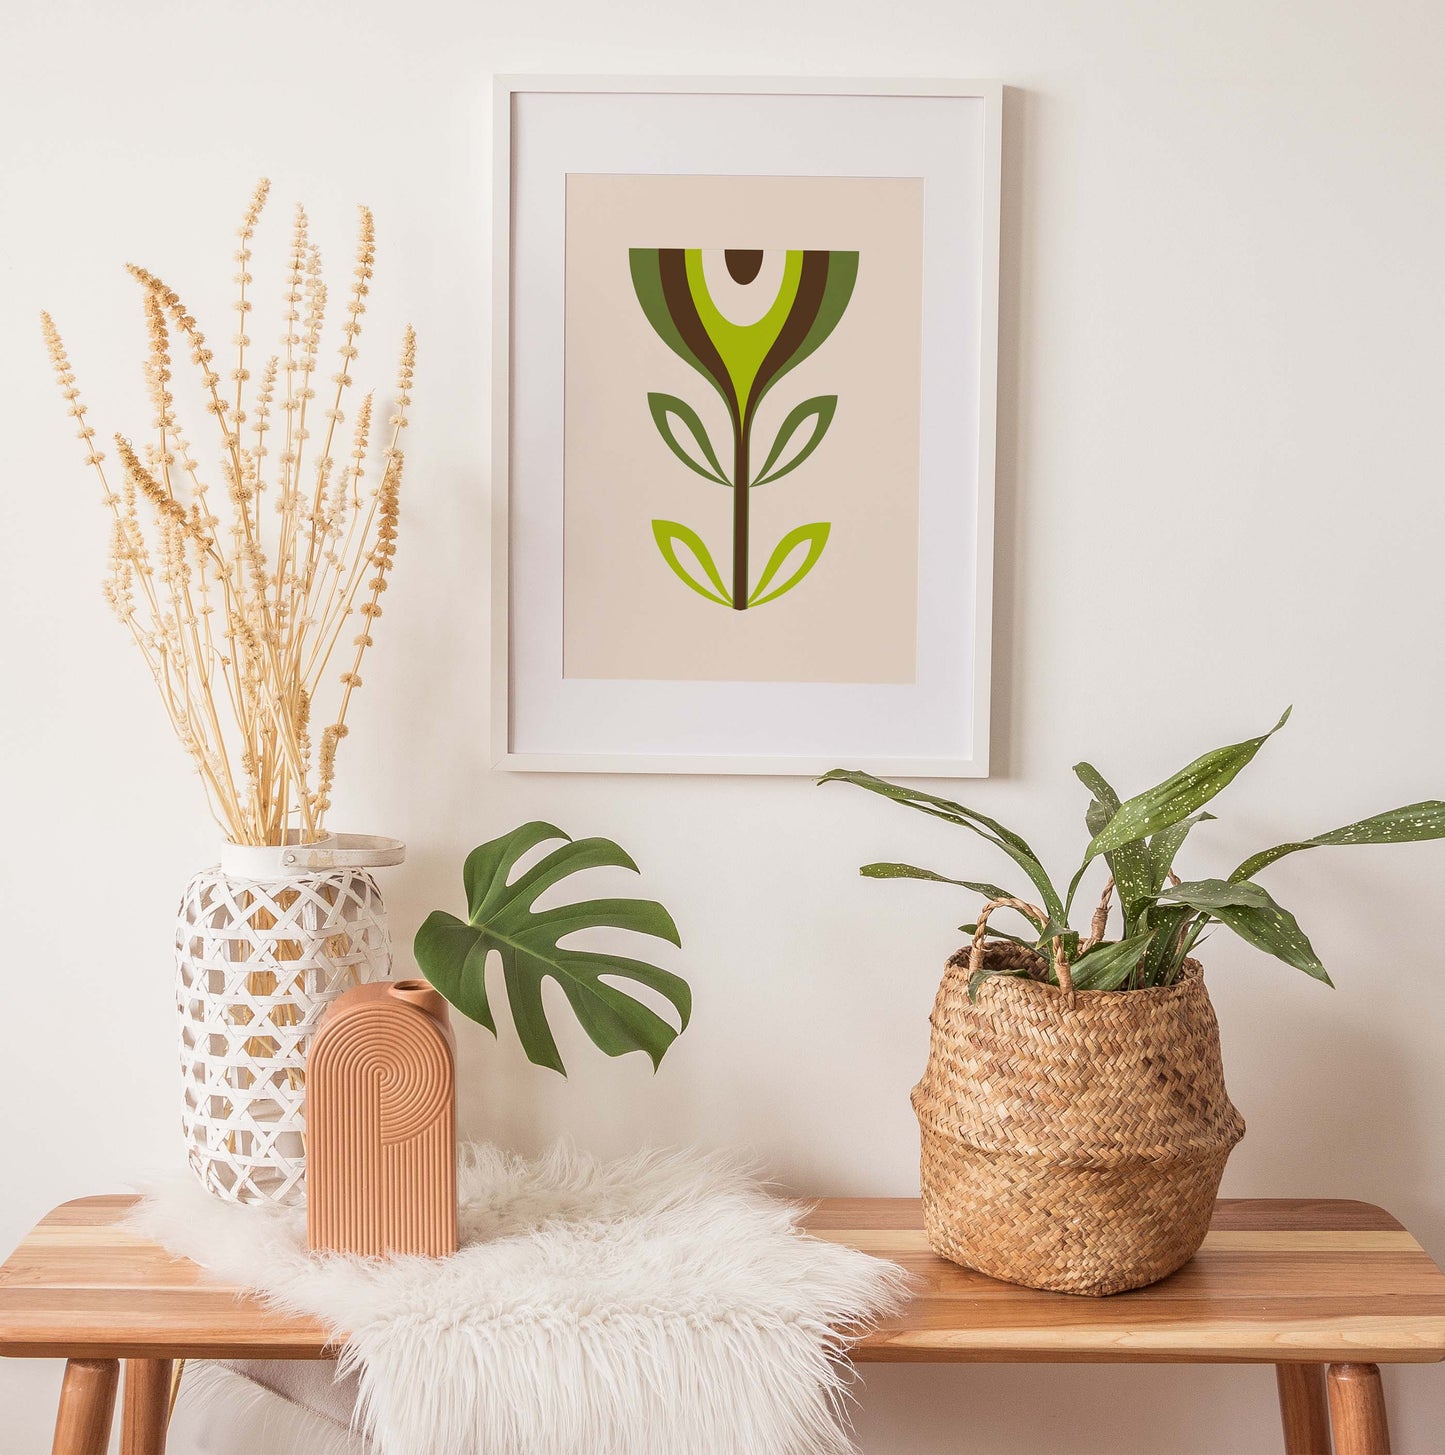 Green flower wall art print with a mid century modern style